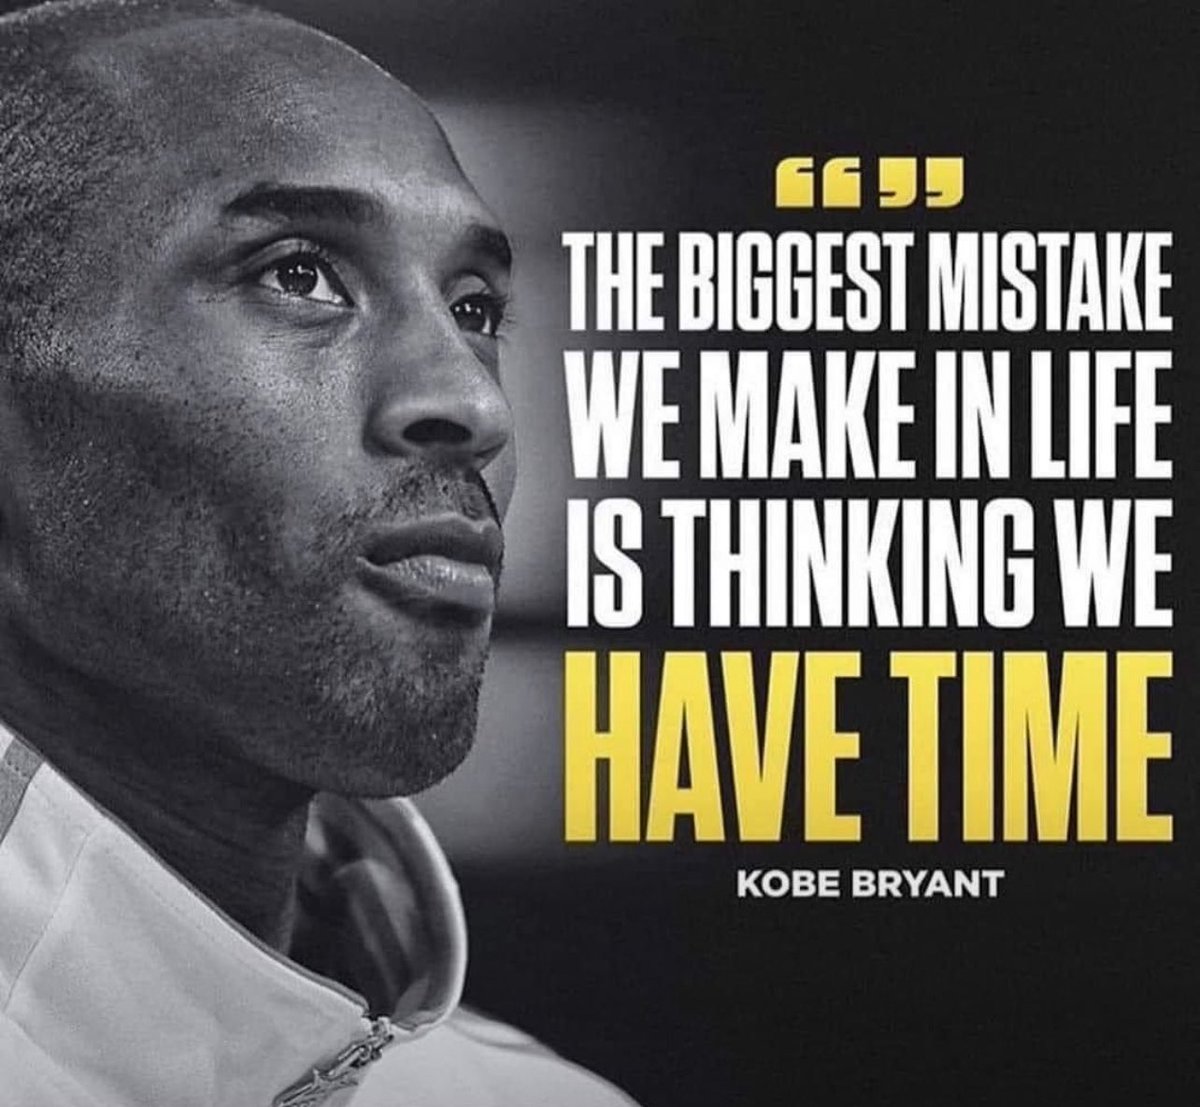 “The biggest mistake we make in life is thinking we have time.” -Kobe Bryant #MambaForever